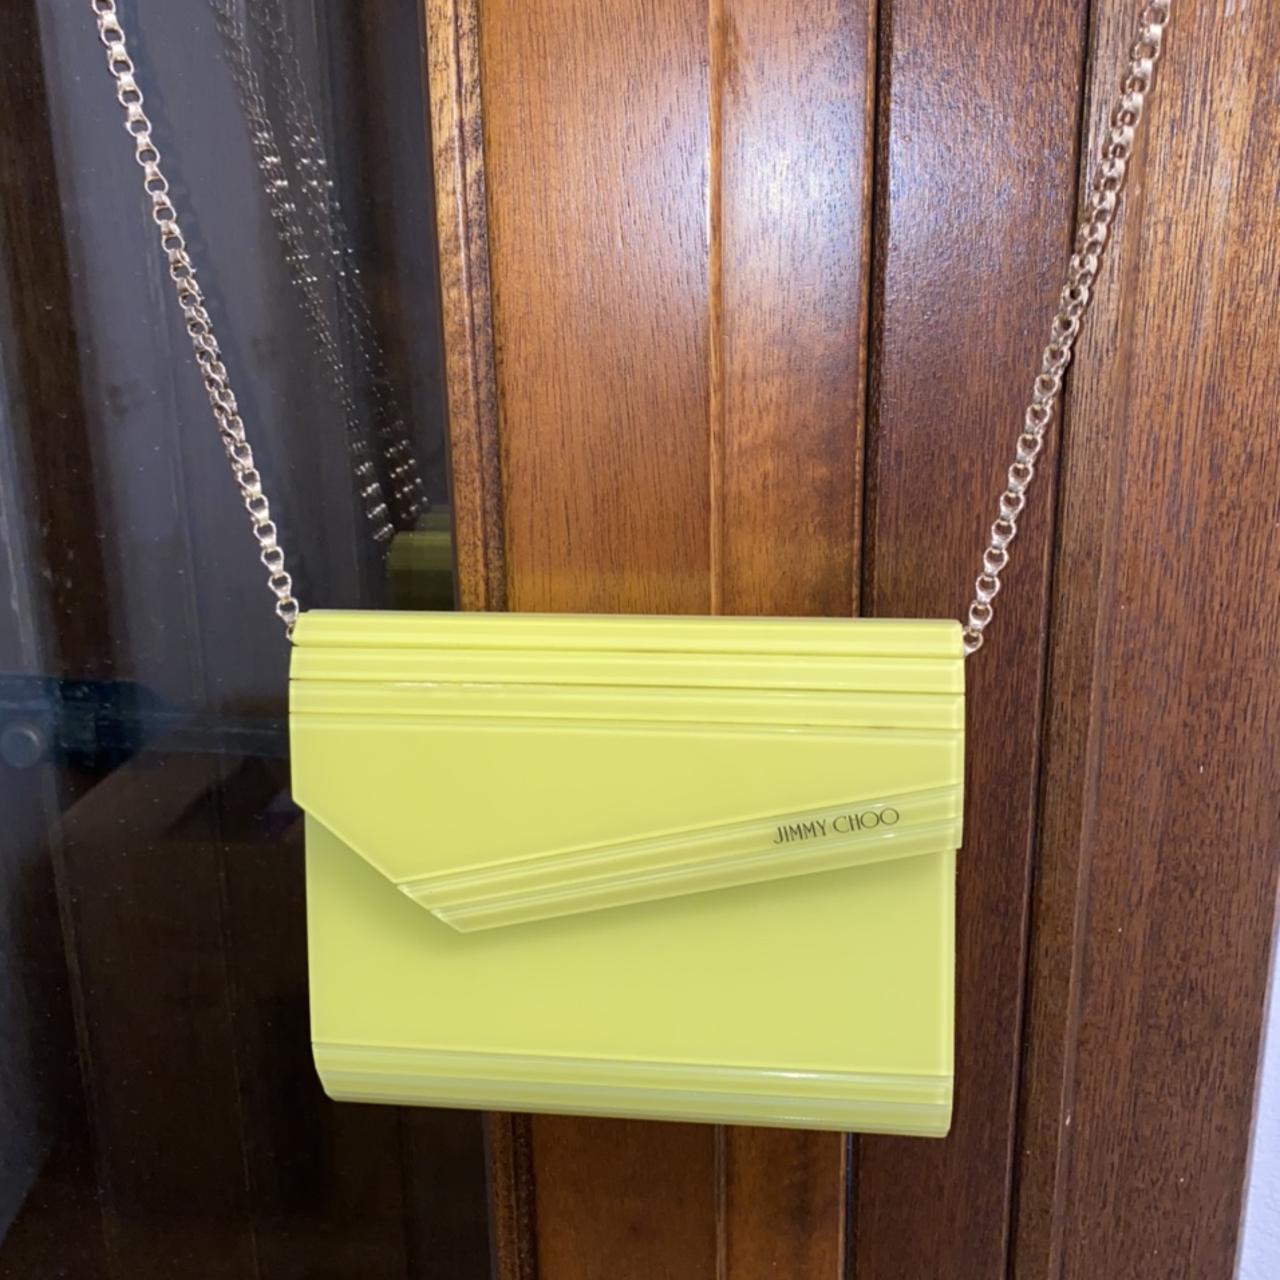 Jimmy Choo candy clutch bag in neon yellow. I used... - Depop